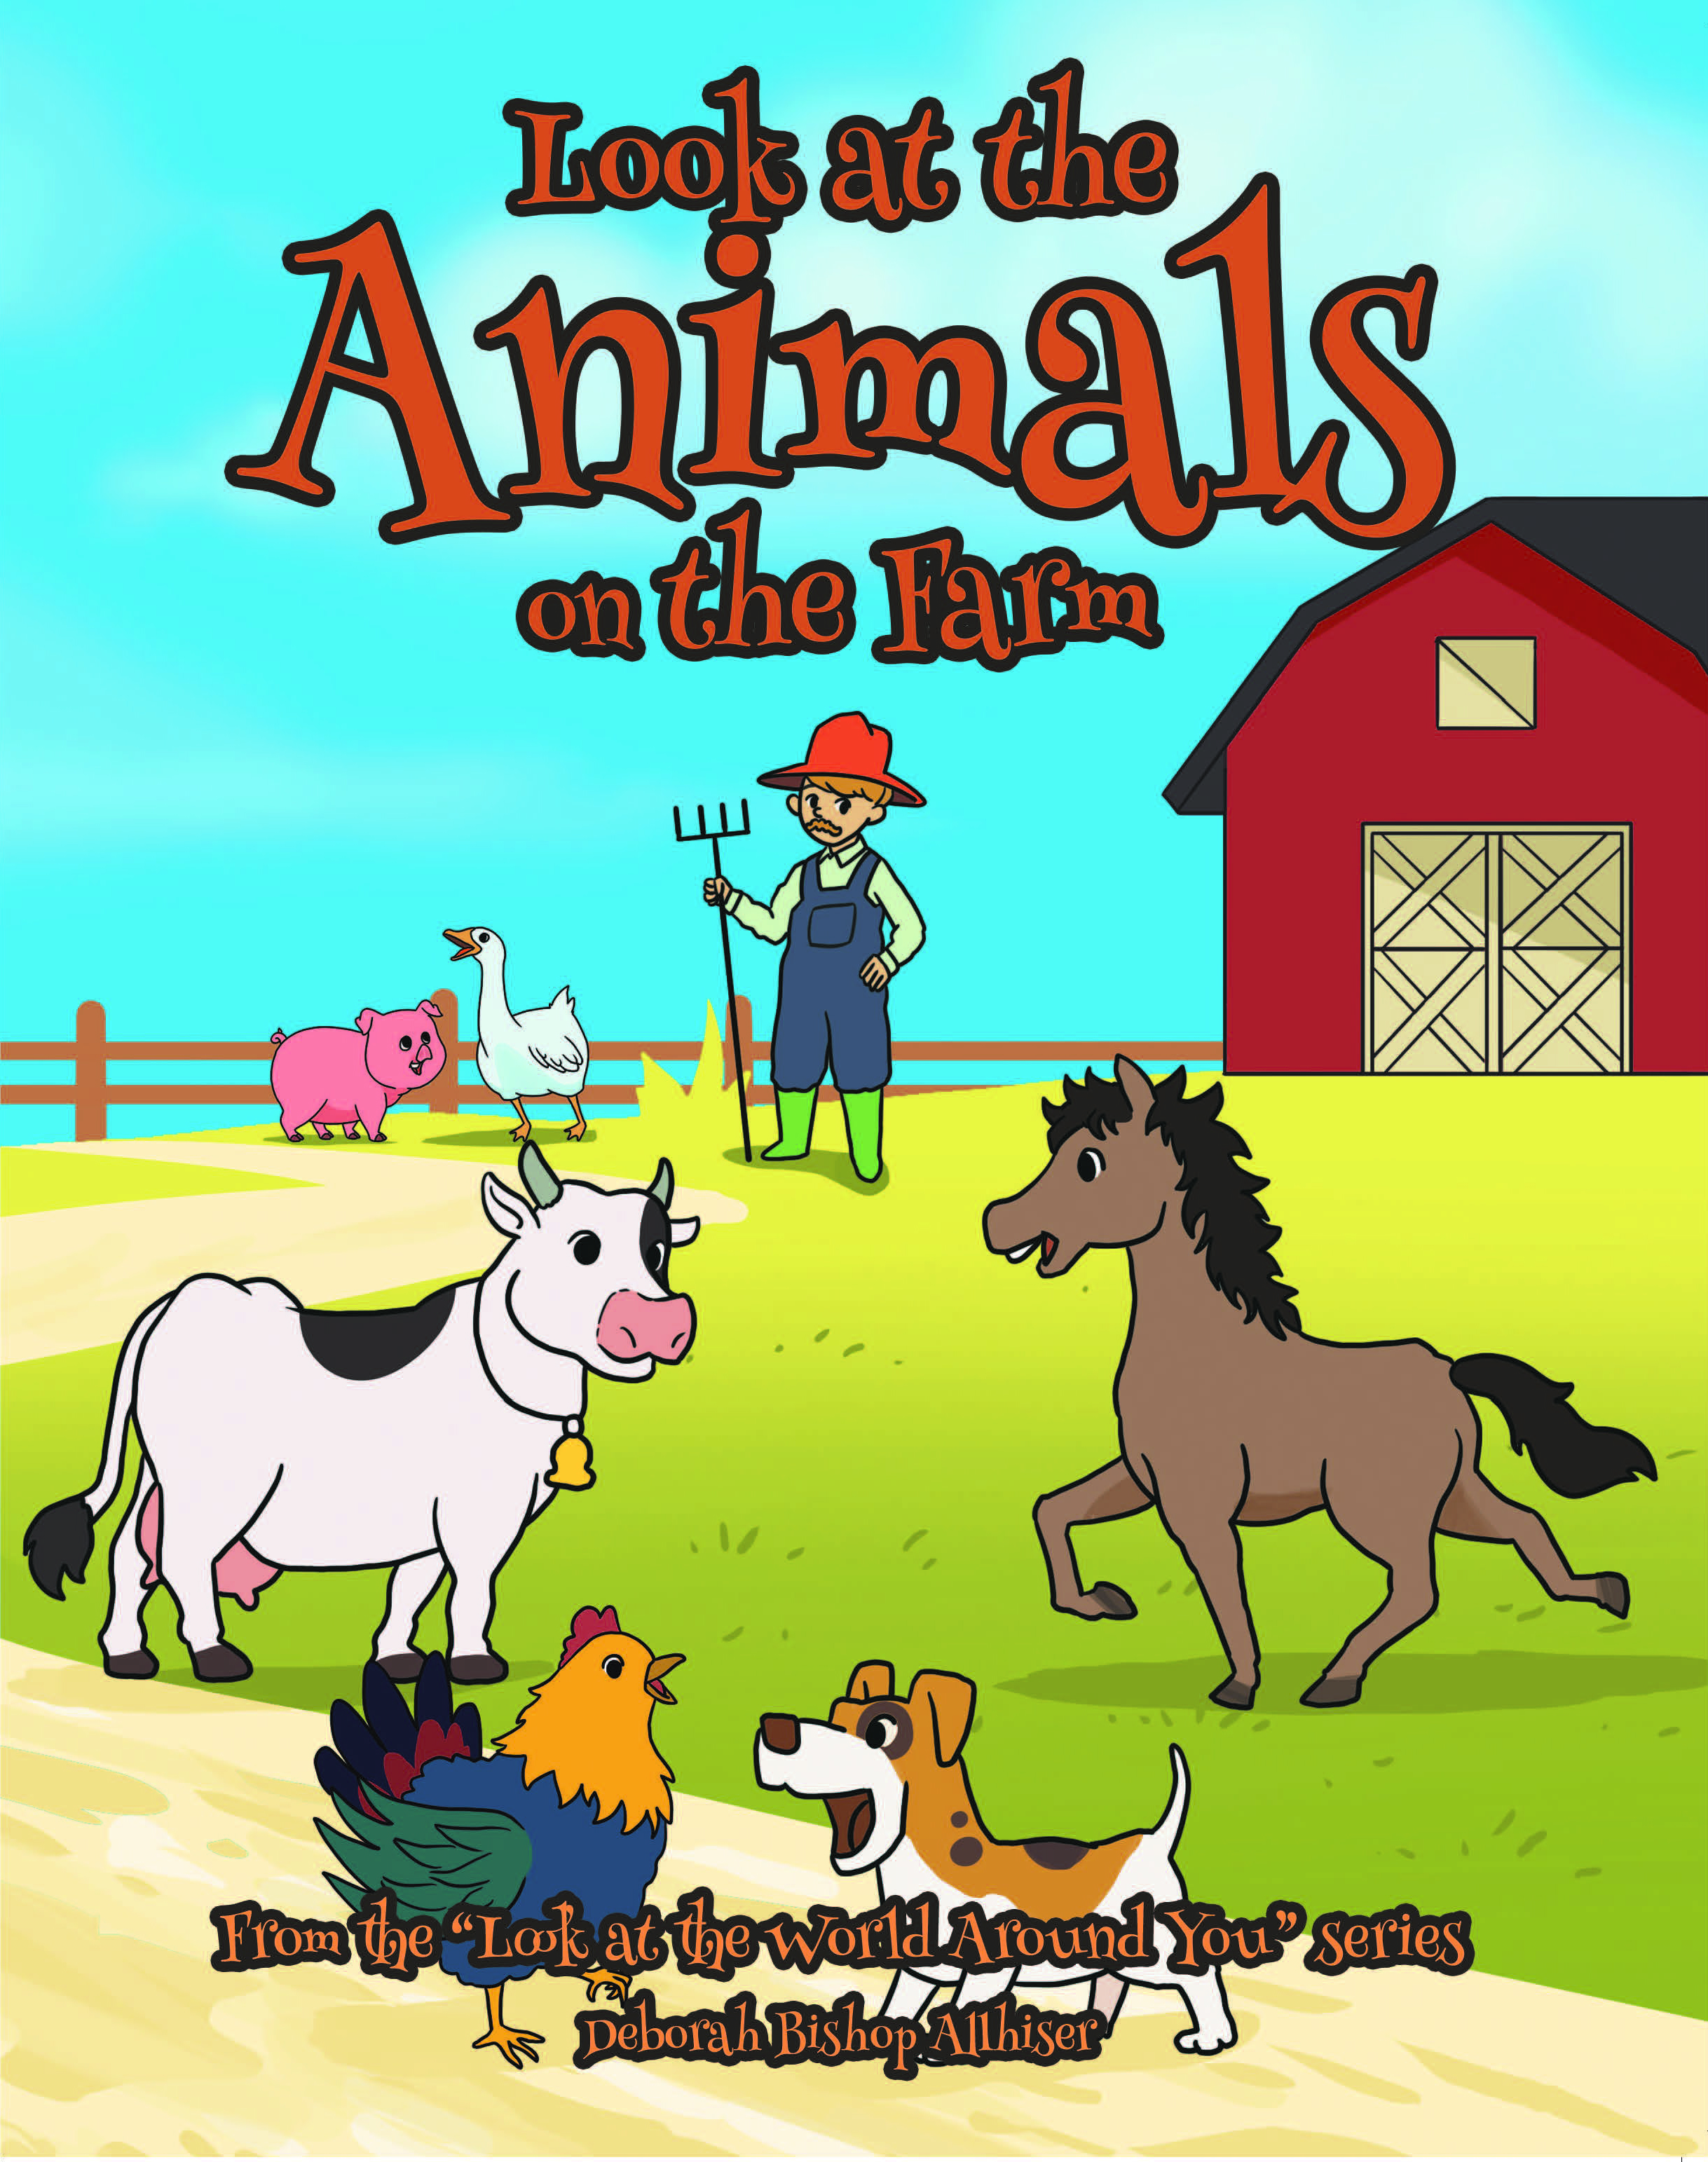 Author Deborah Bishop Allhiser’s New Book, "Look at the Animals on the Farm," Illustrates How Animals Provide Goods That Are Used in Everyday Life